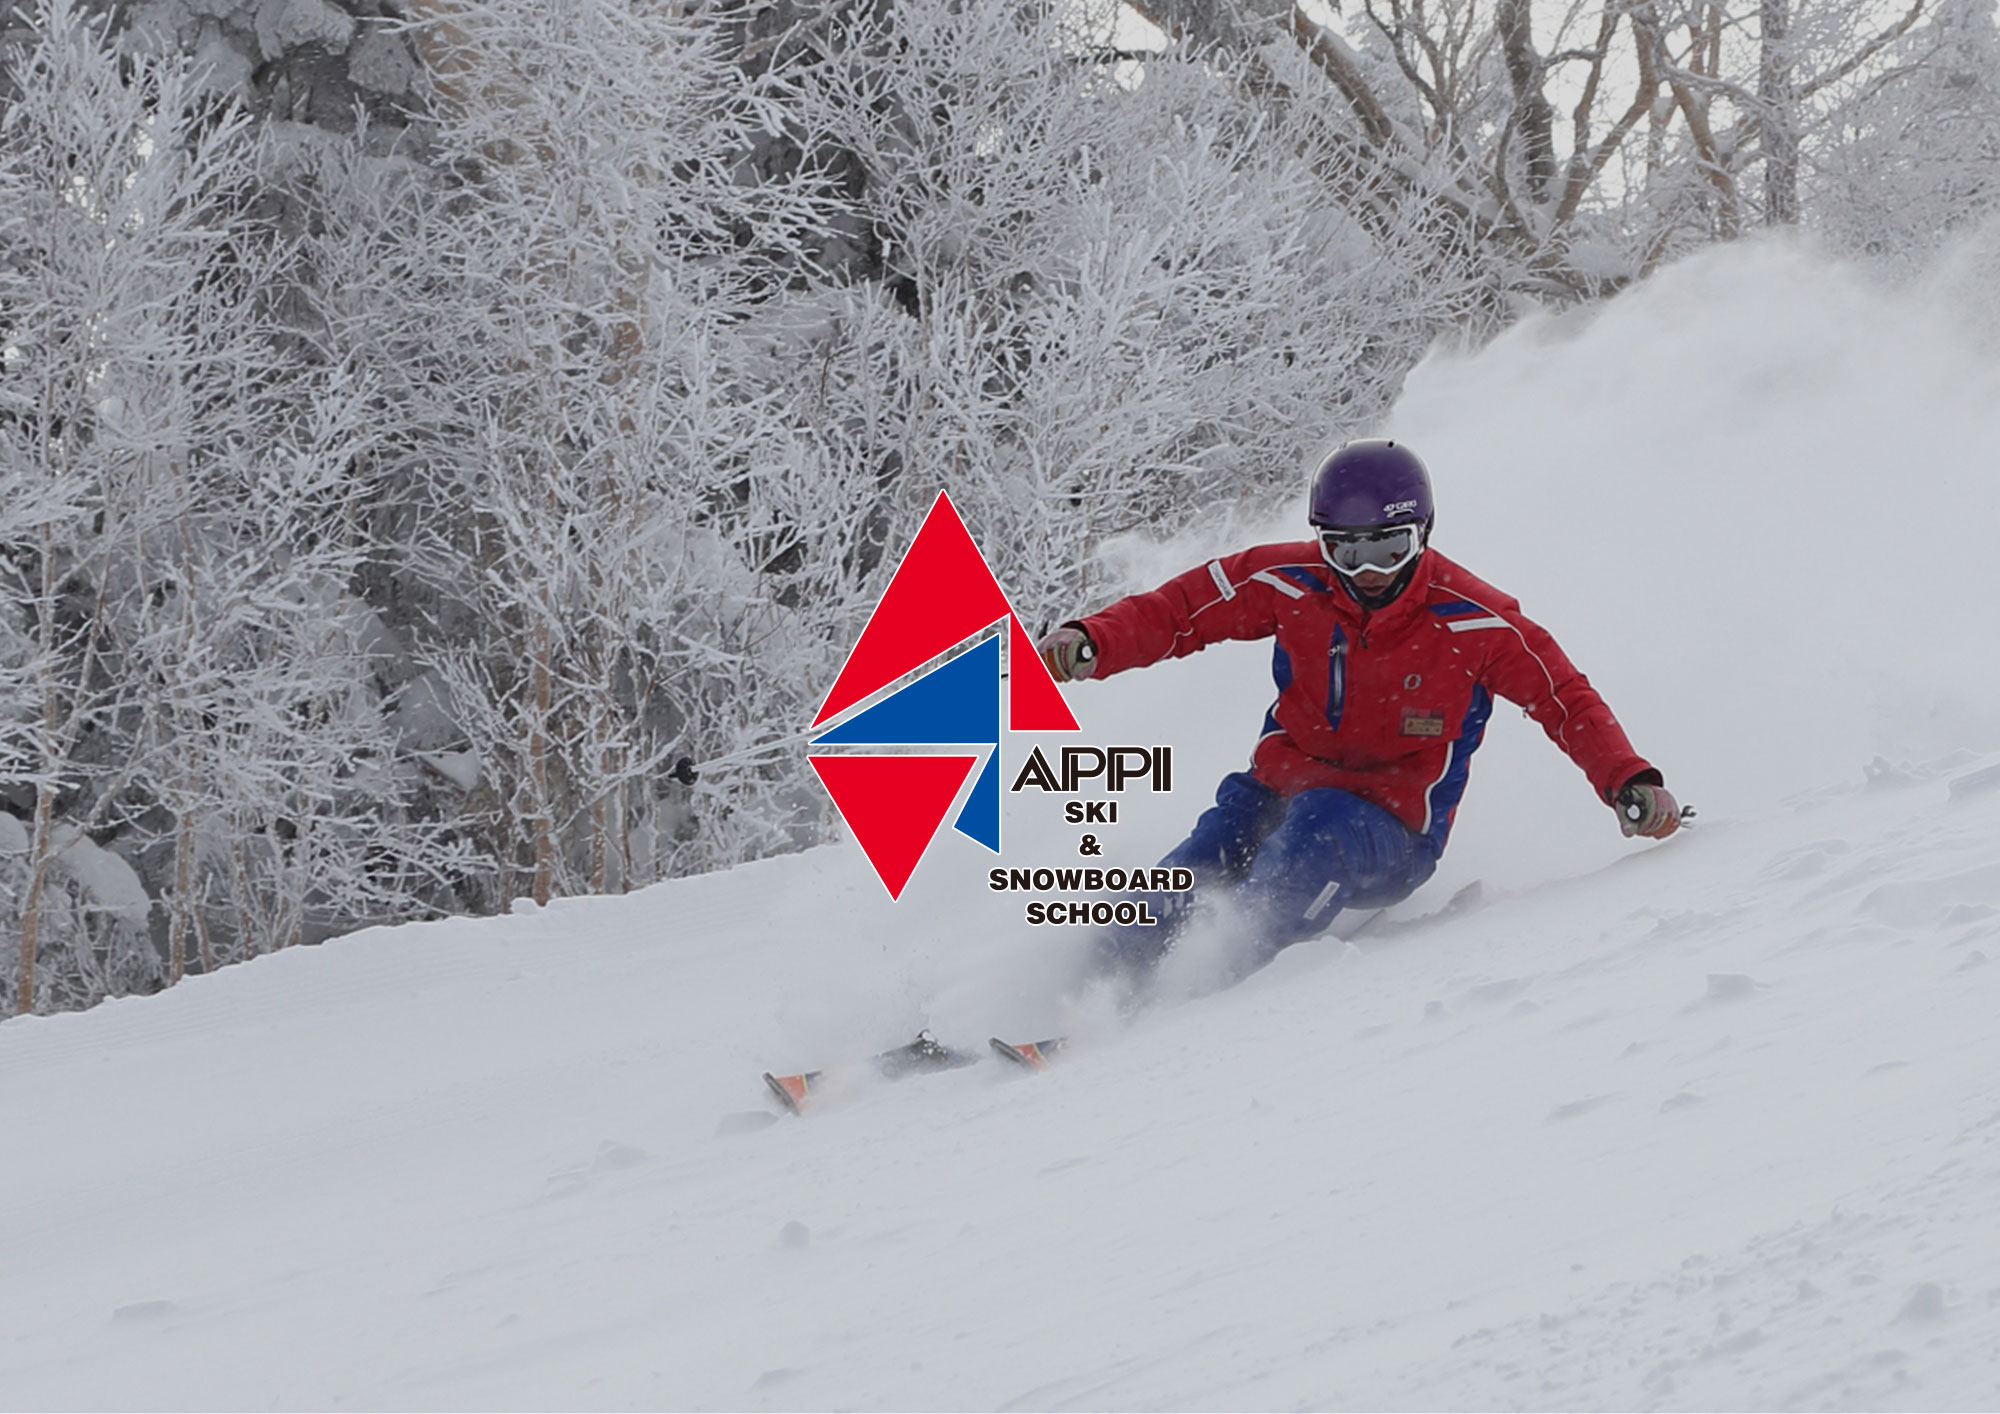 Ouderling replica kogel Ski & Snowboard school | APPI English Official Site – Be HAPPY In APPI –